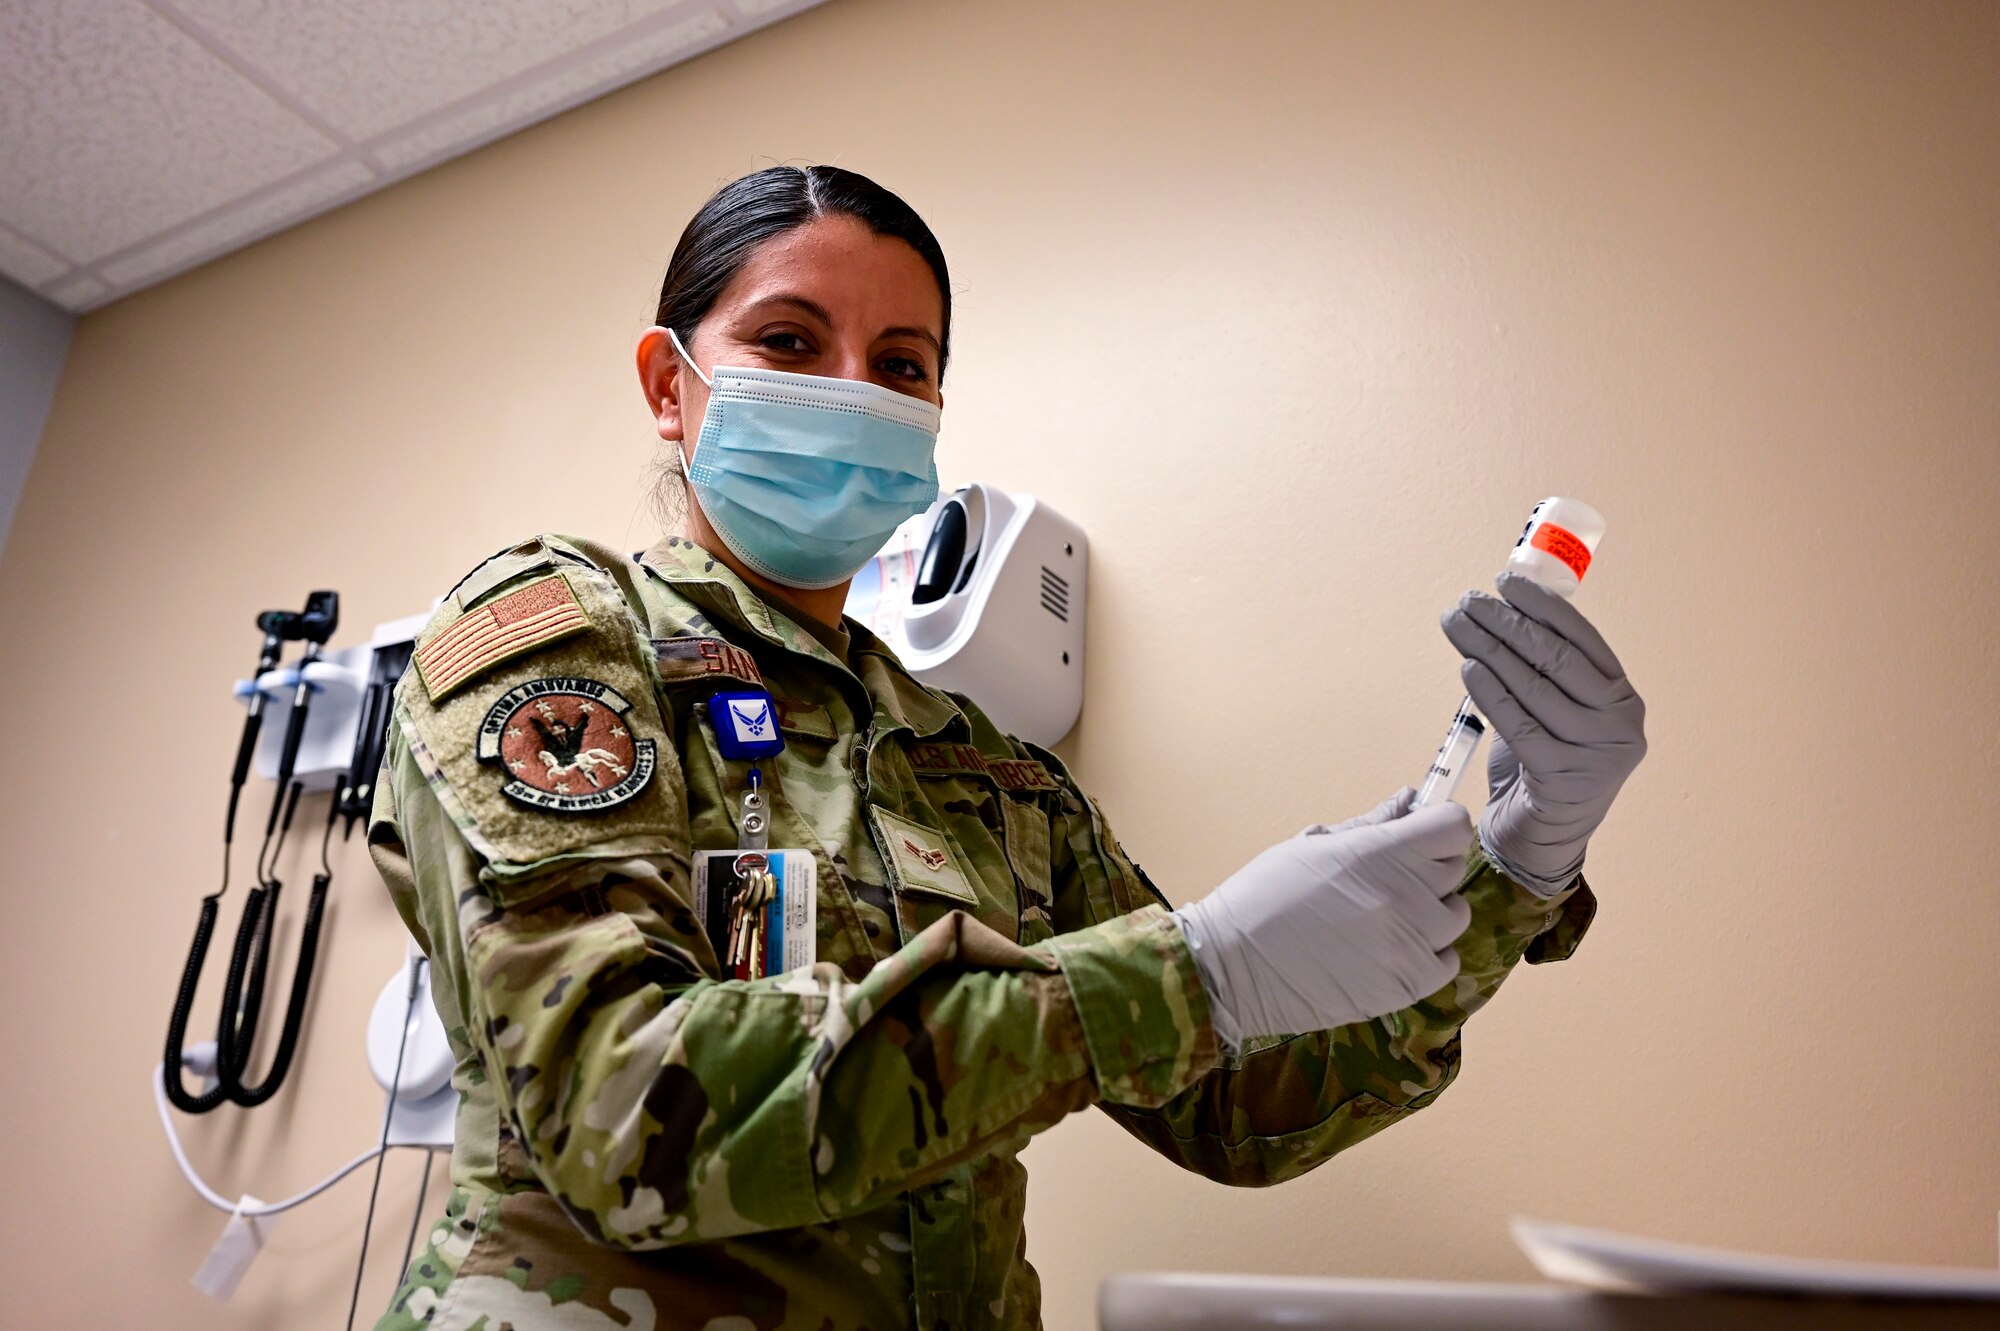 An Airman holds a vial in a medical facility.